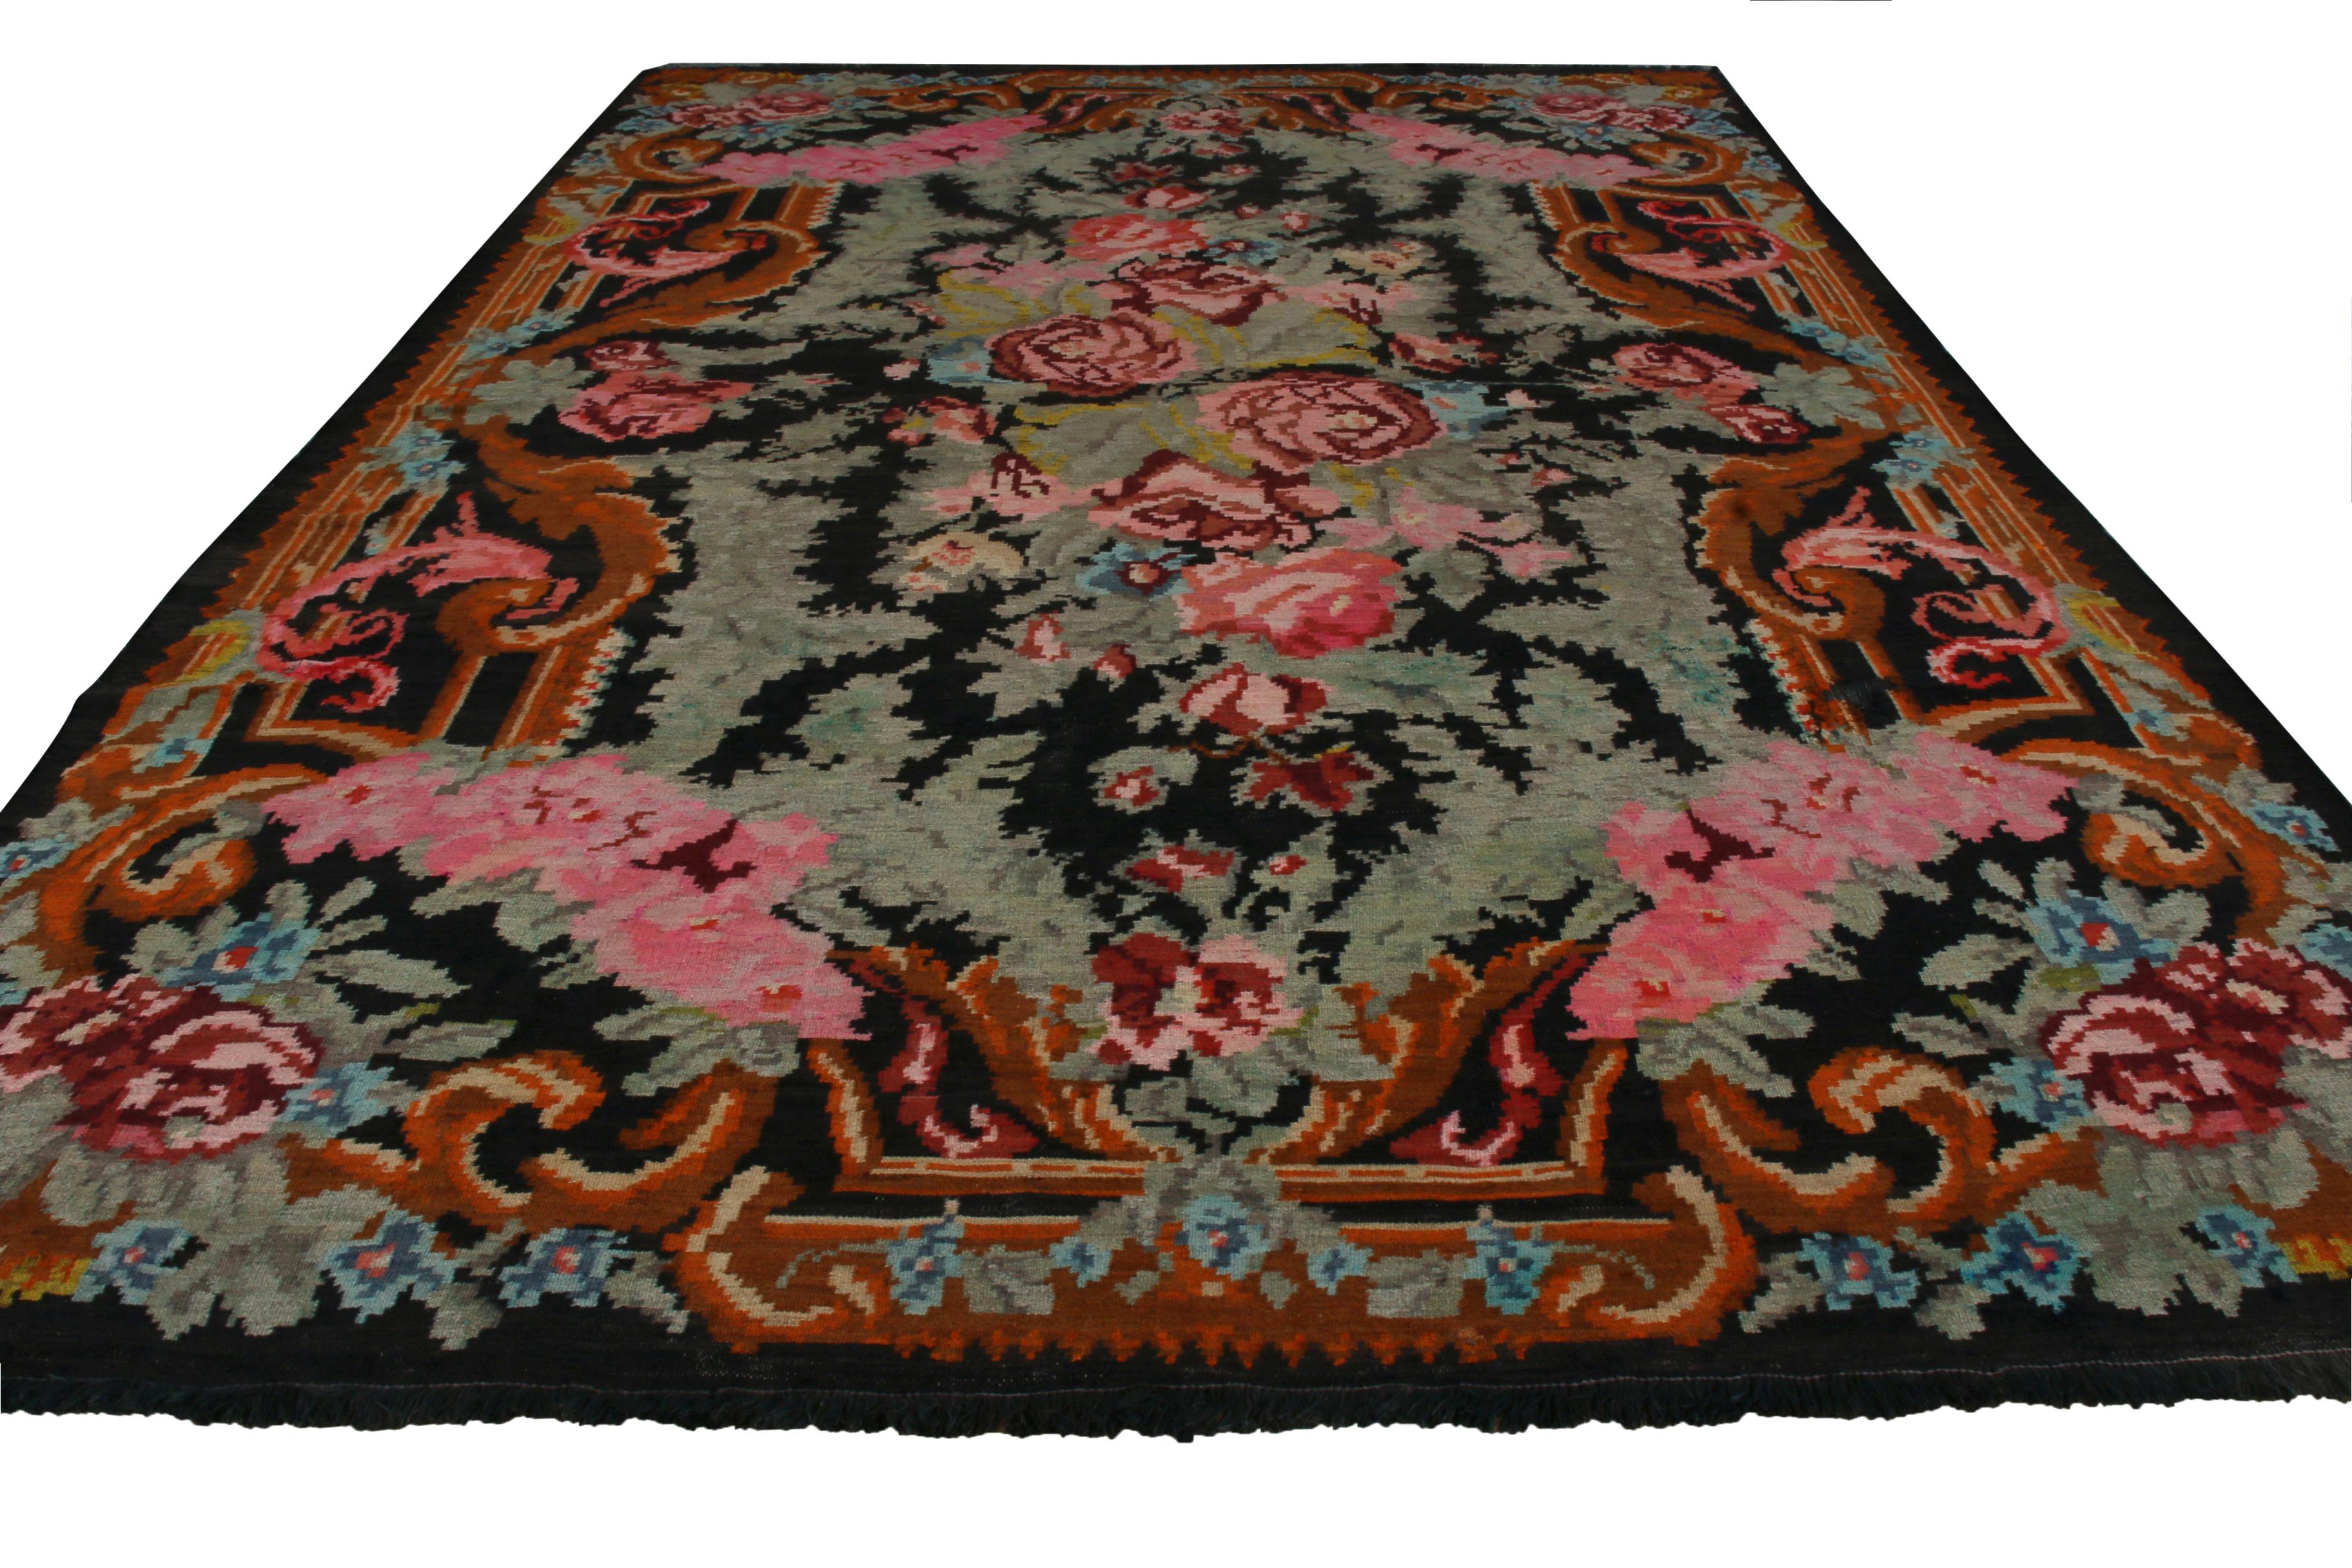 A Turkish approach to a style that originated in Romania, this vintage Bessarabian Kilim rug was handmade in Turkey with a wool flat-weave circa 1950-1960. Set against a picturesque black background complementing the green leaves from its flowers,